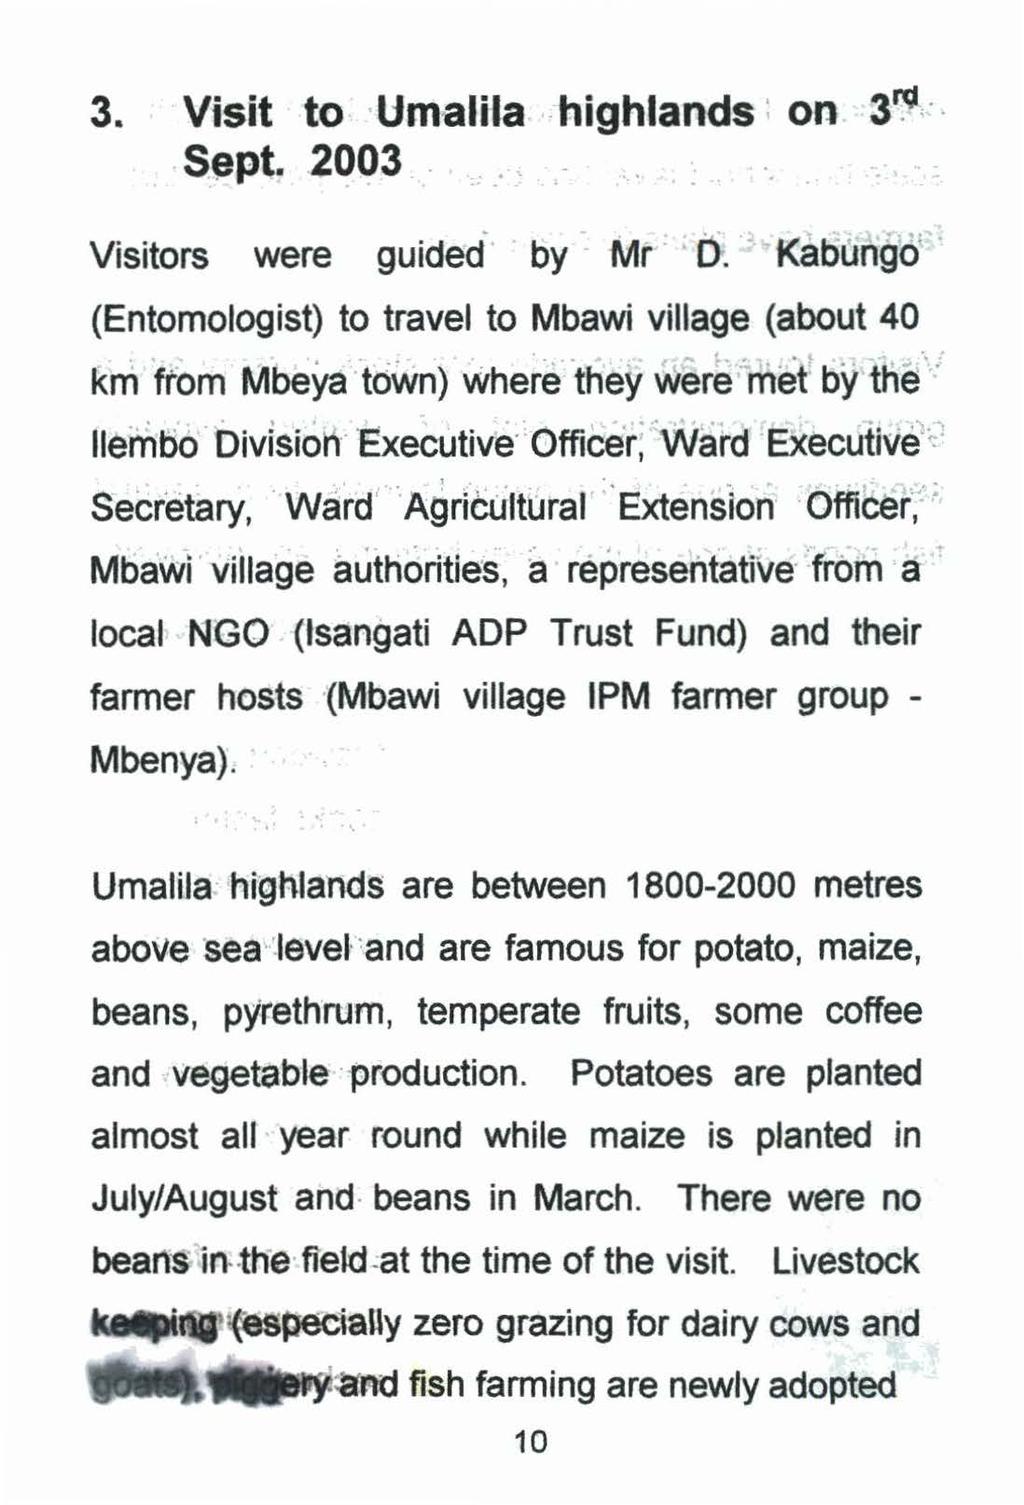 3. Visit to Umalila highlands on 3~ Sept. 2003... Visitors were guided by Mr O. Kabungo (Entomologist) to travel to Mbawi village (about 40 km ftom Mbeya town) where they were met by the.